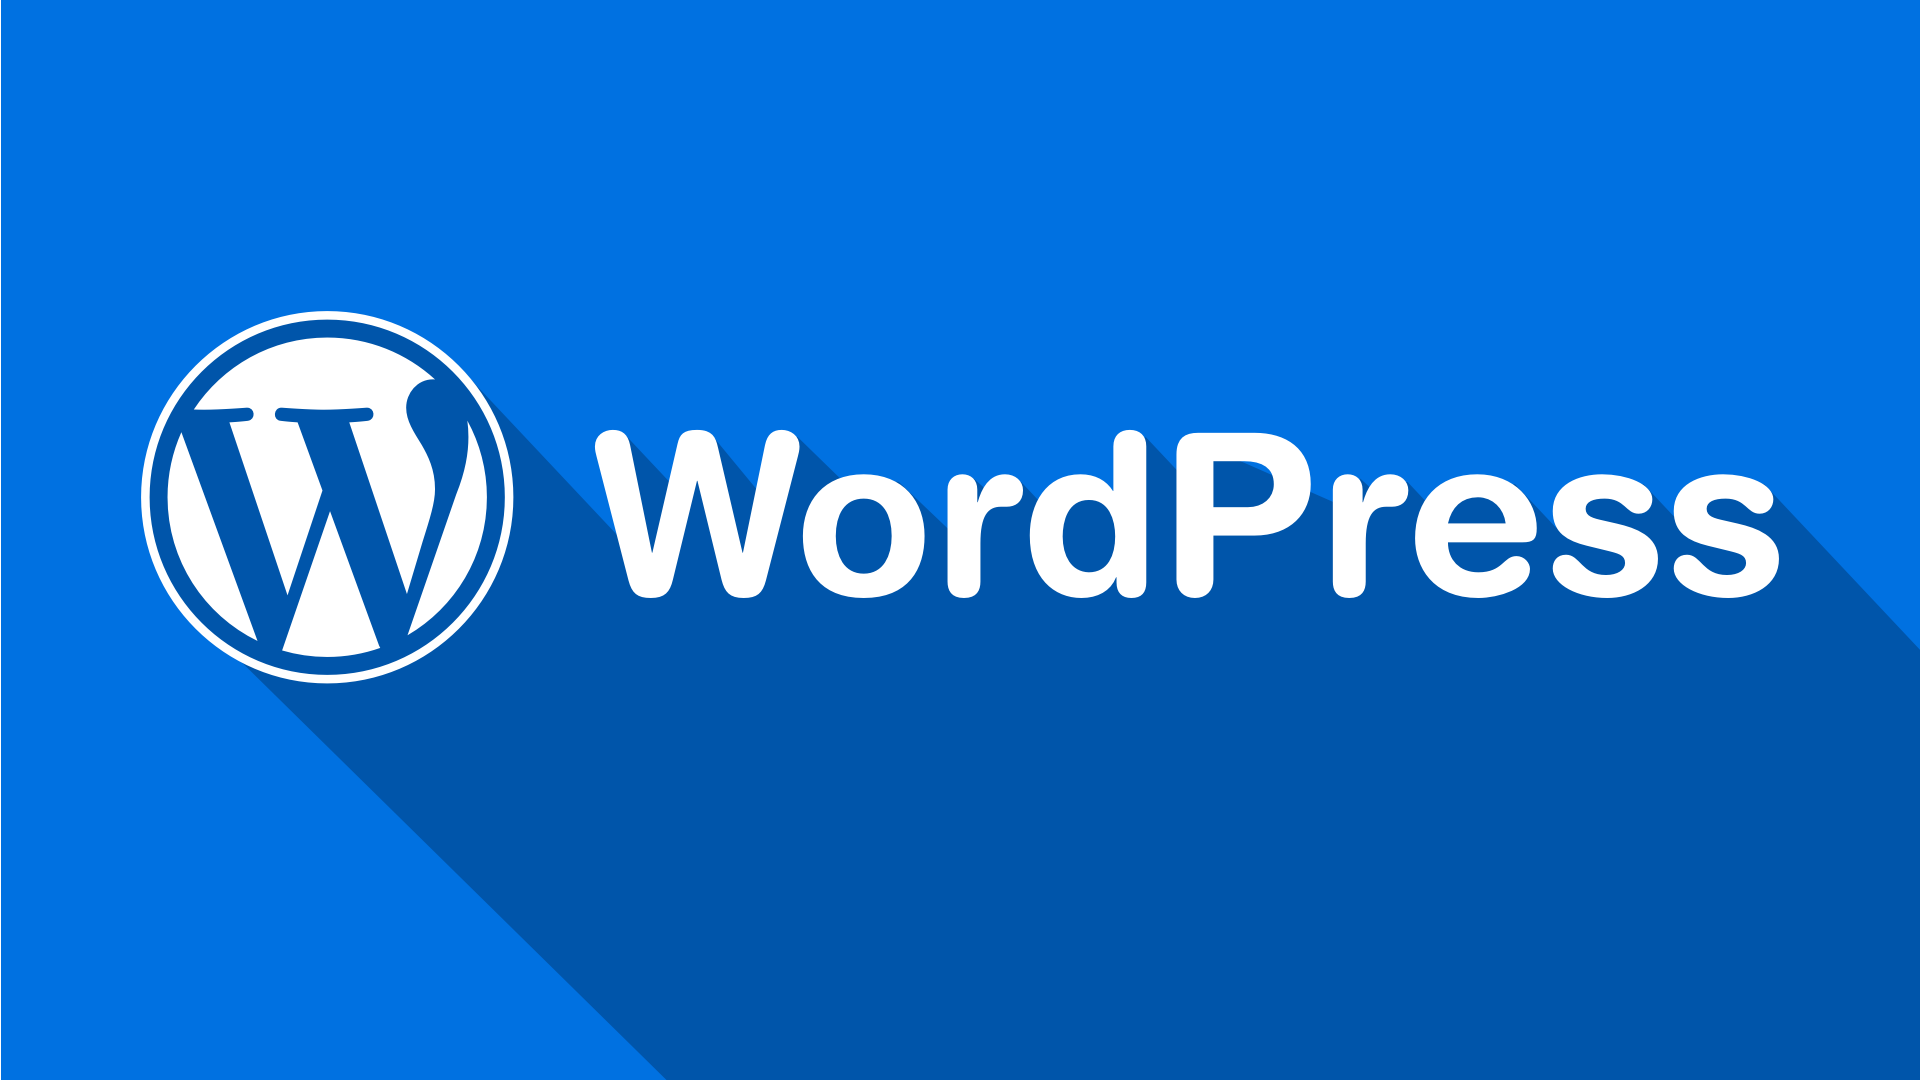 WordPress websites can now accept instant Bitcoin payments